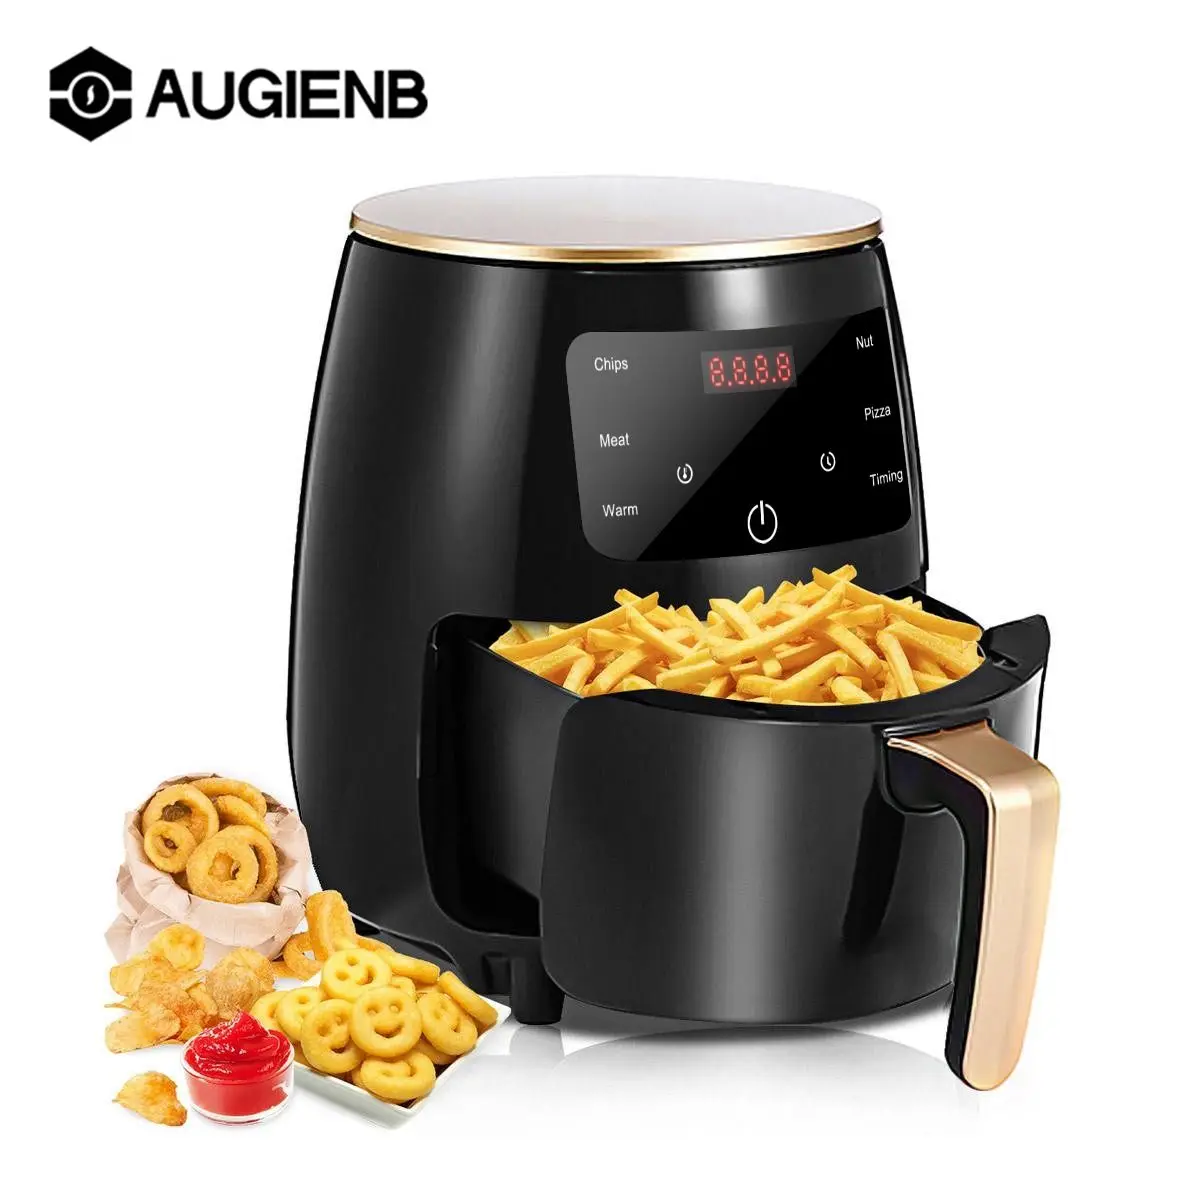 AUGIENB 1400W 4.5L Air Fryer Oil free Health Fryer Cooker Multifunction Smart Touch LCD Deep Airfryer for French fries Pizza